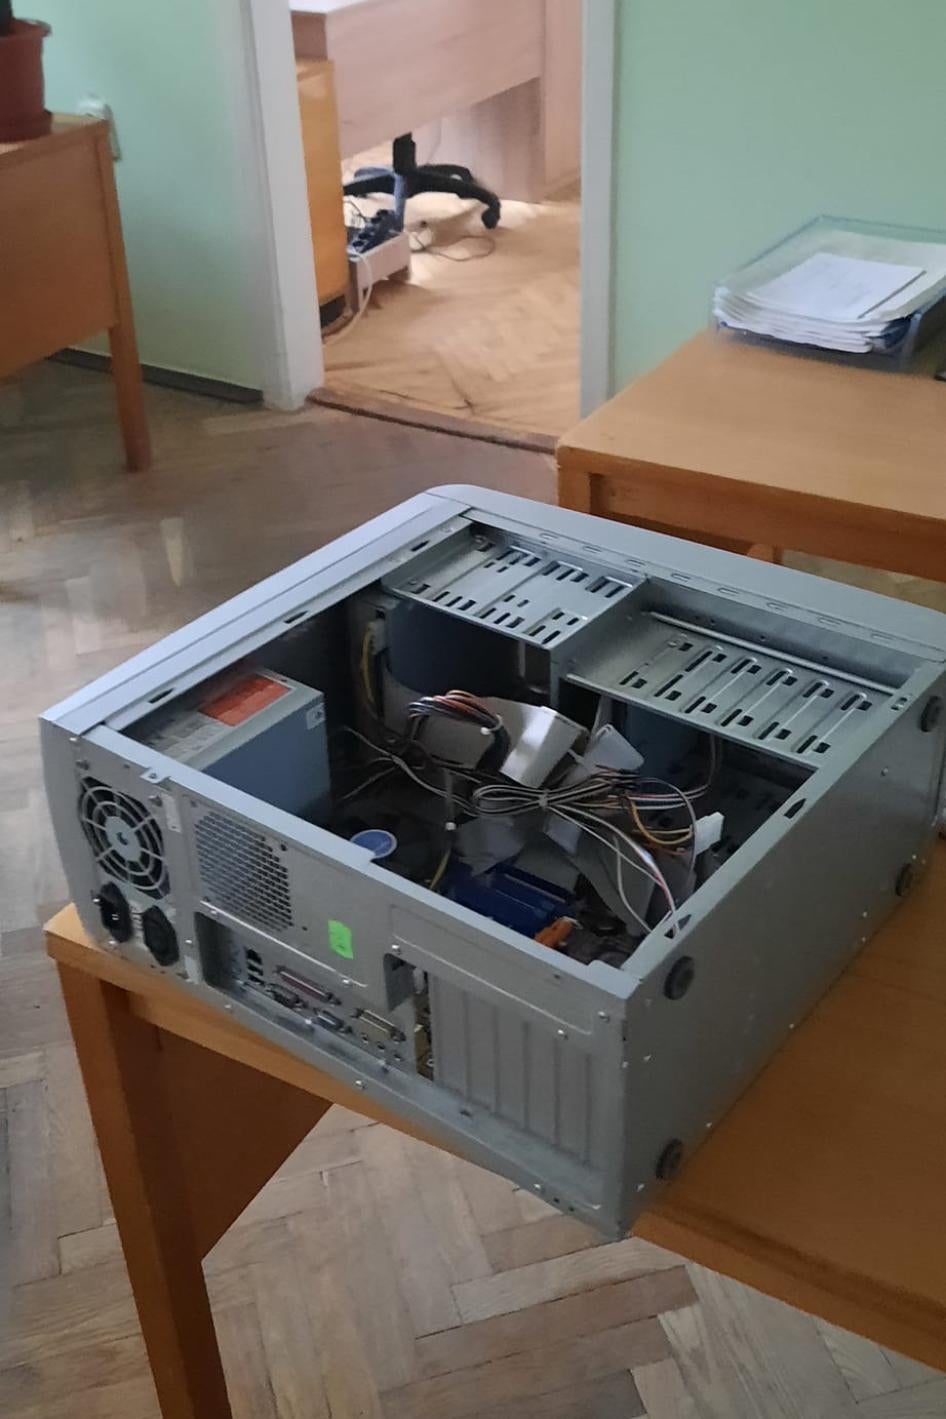 destroyed computer in an office